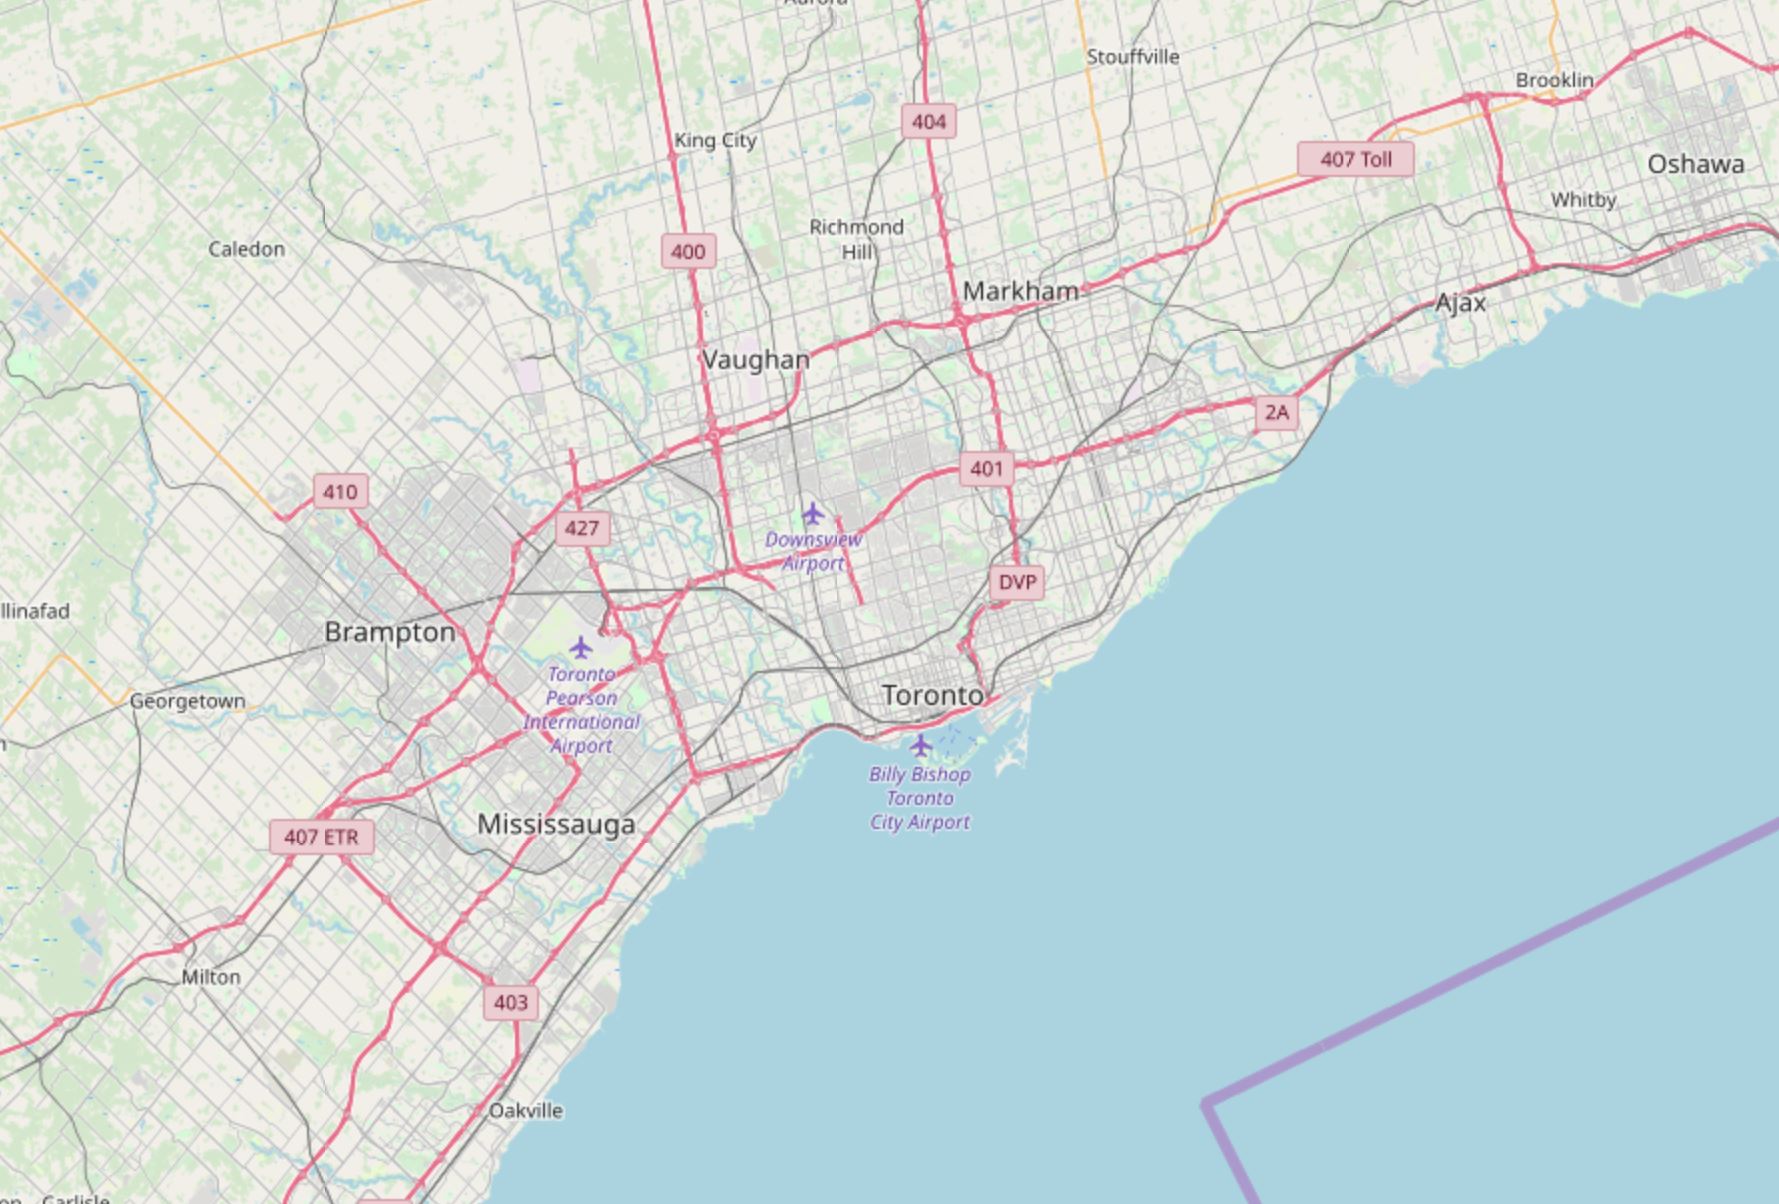 example of an OpenStreetMap Basemap of Toronto area showing streets and toll roads